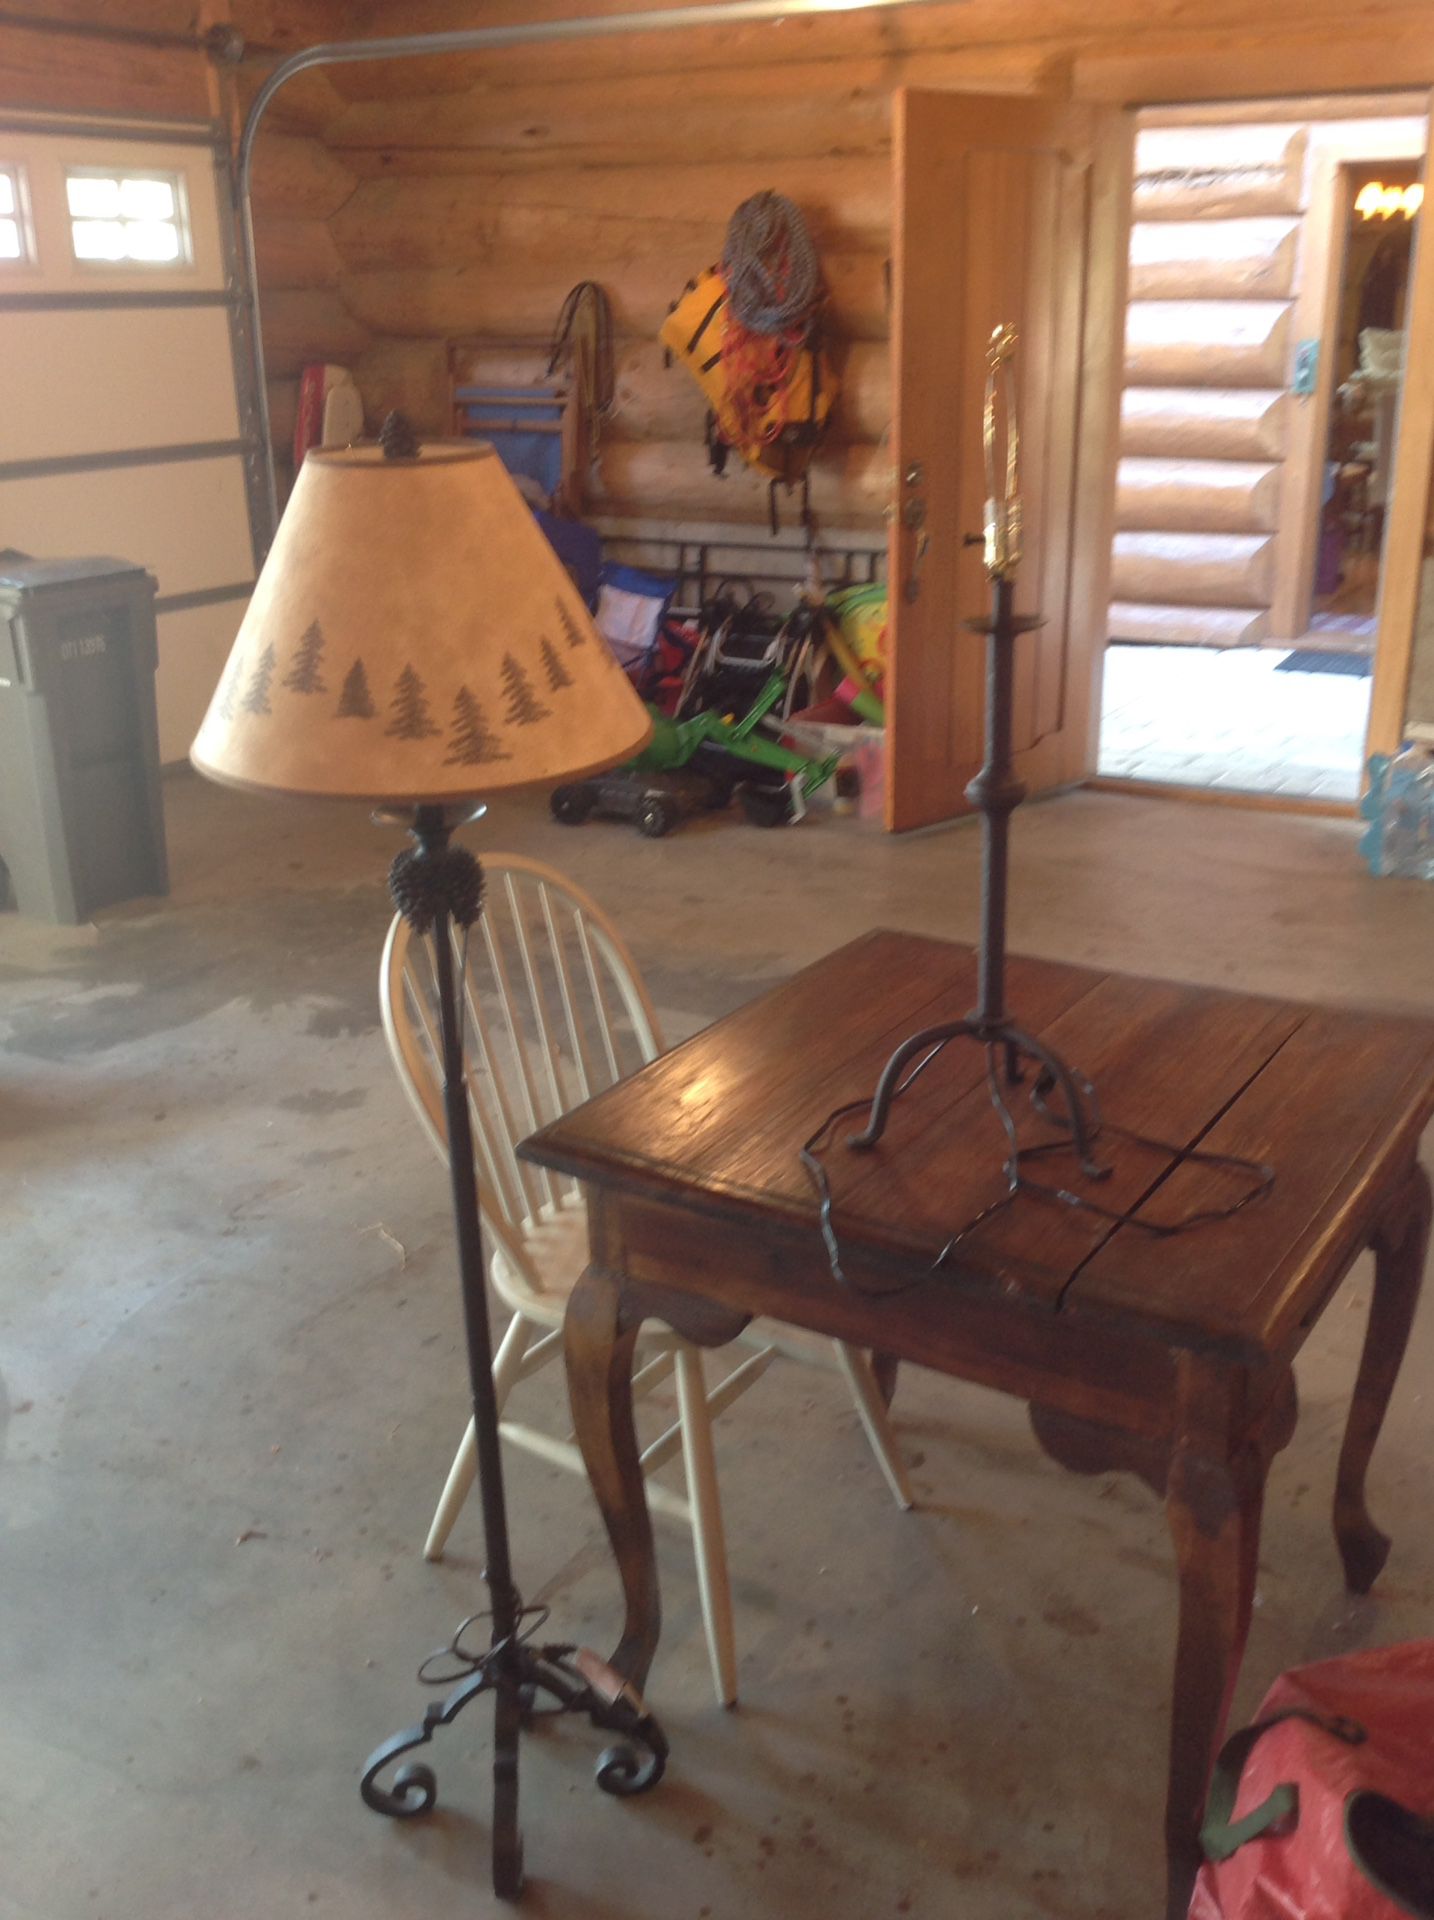 Antique Table, chair, floor lamp and table lamp (without shade).